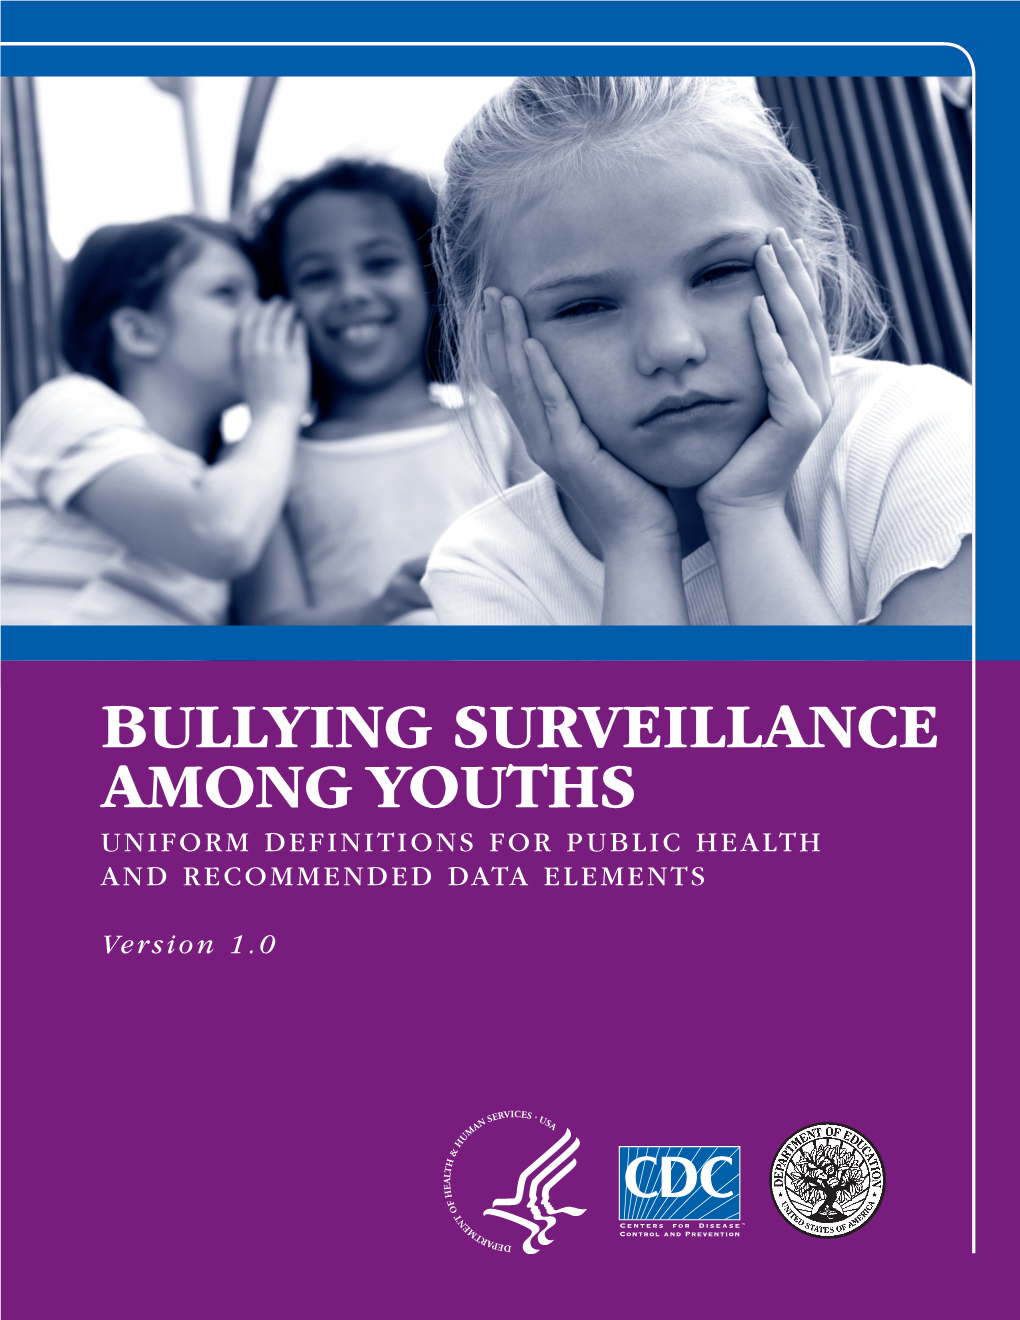 Bullying Surveillance Among Youths Uniform Definitions for Public Health and Recommended Data Elements